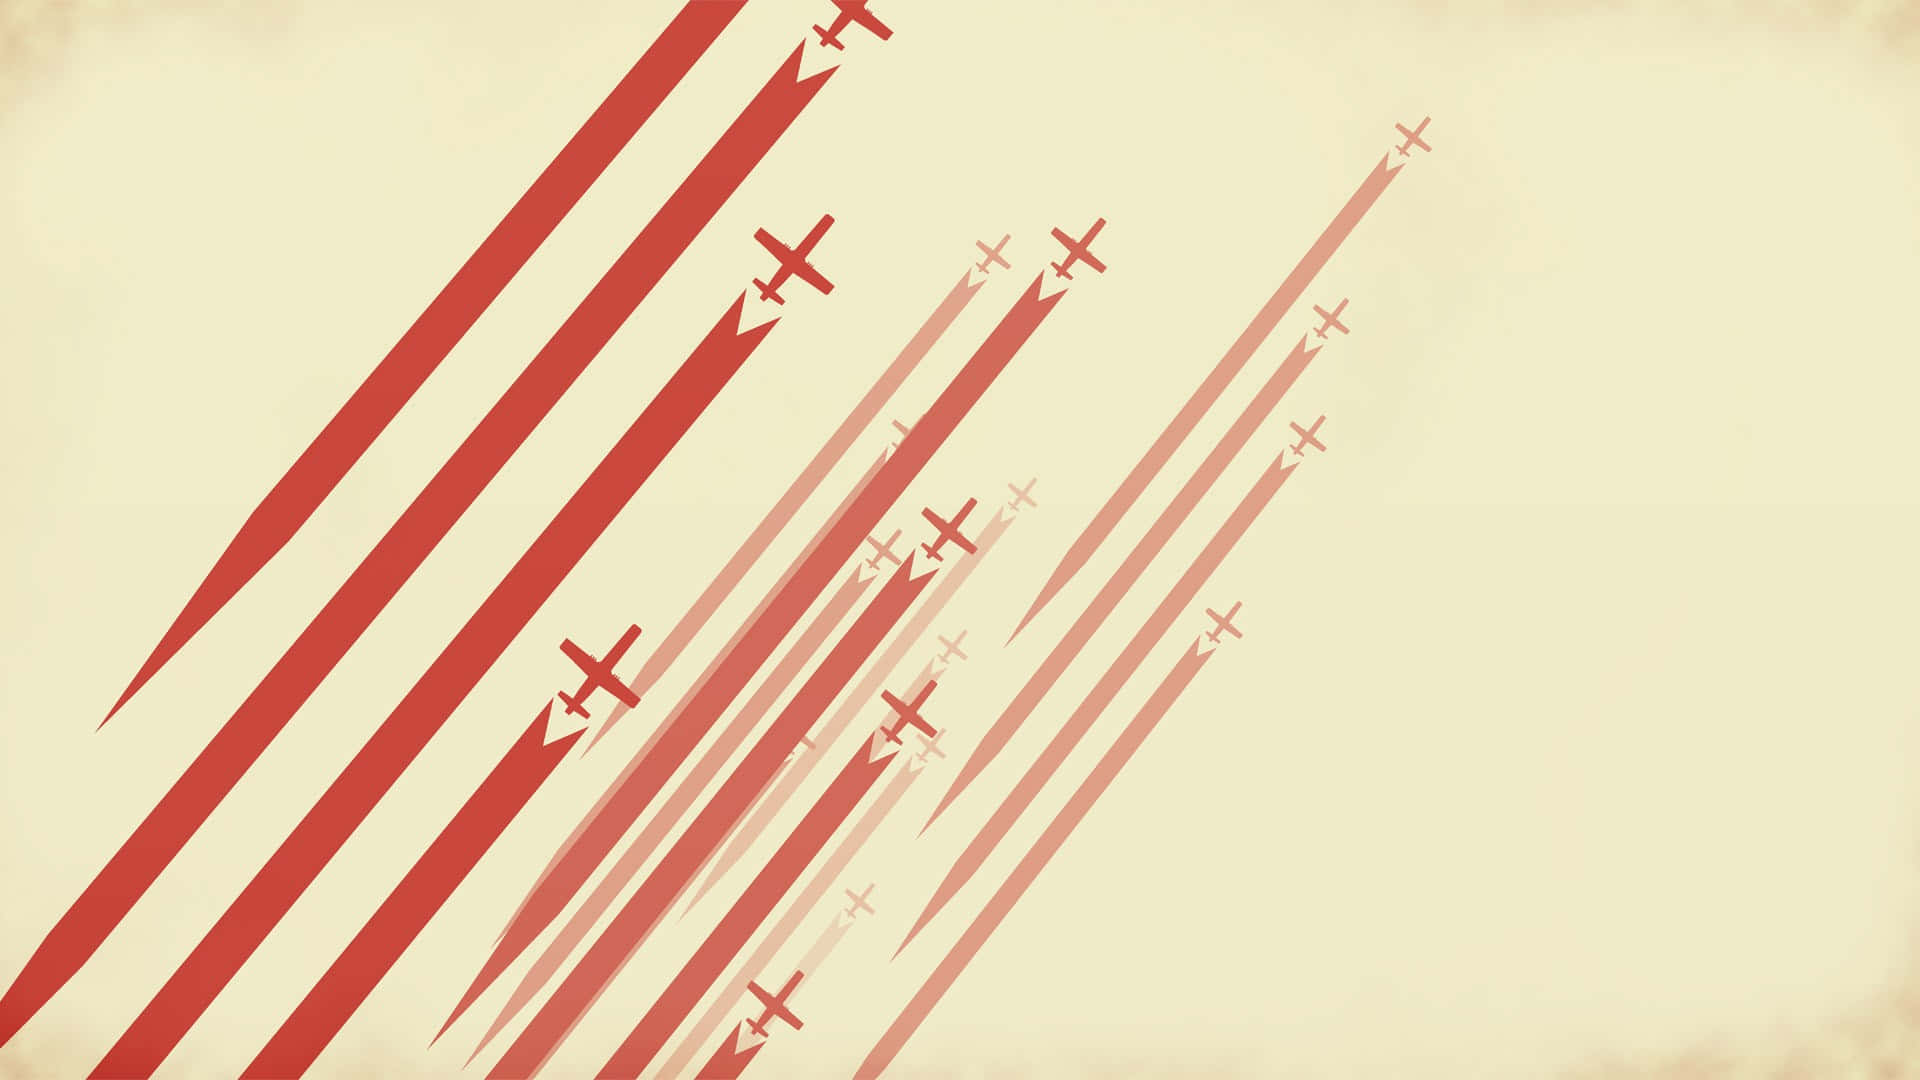 A Red And White Airplane Flying In The Sky Wallpaper